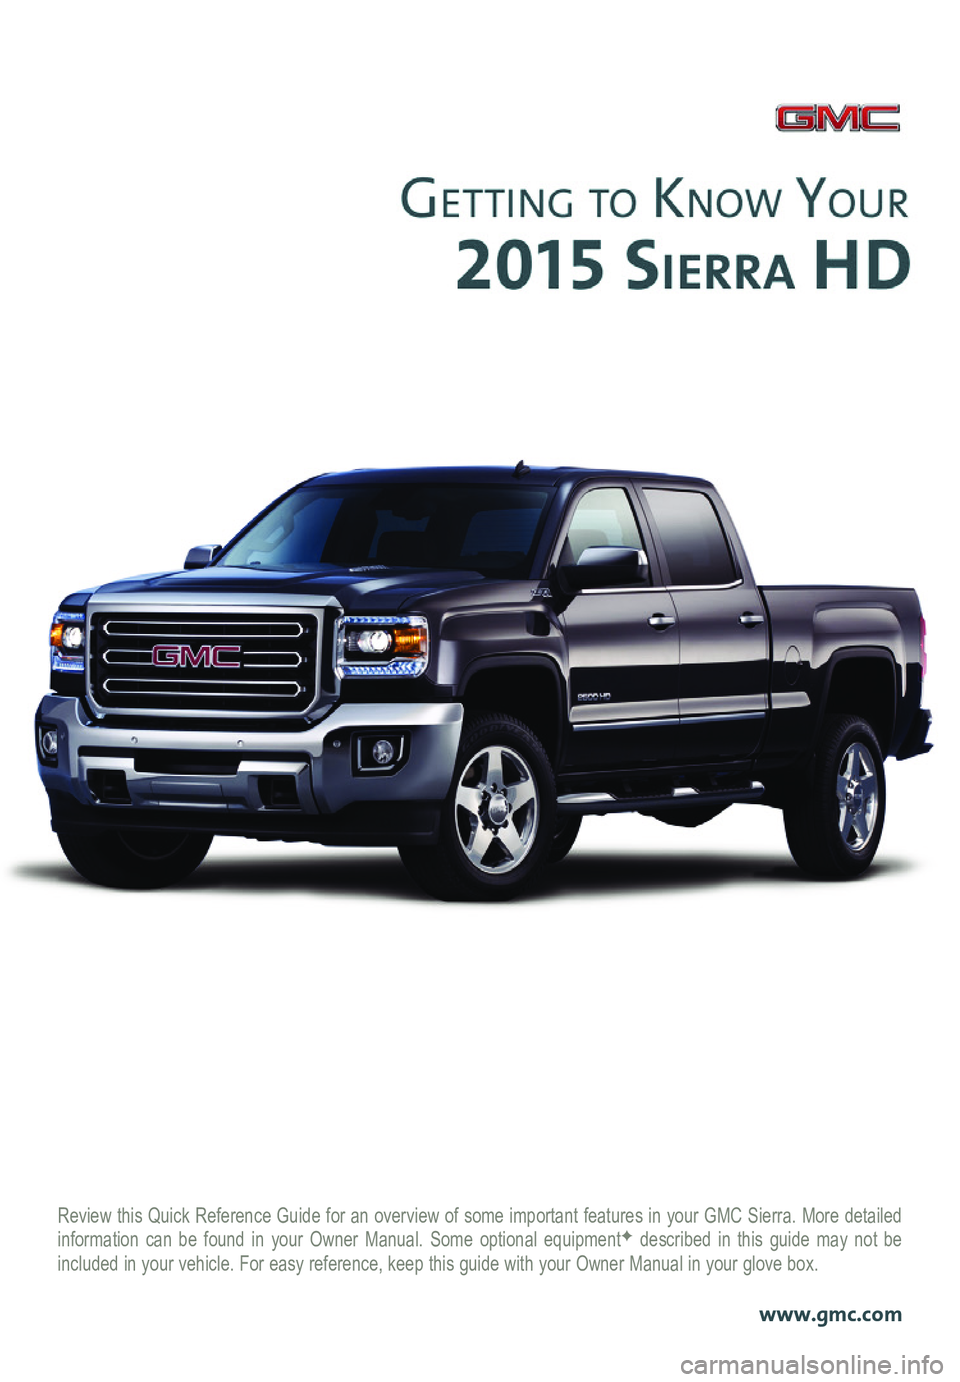 GMC SIERRA HD 2015  Get To Know Guide 